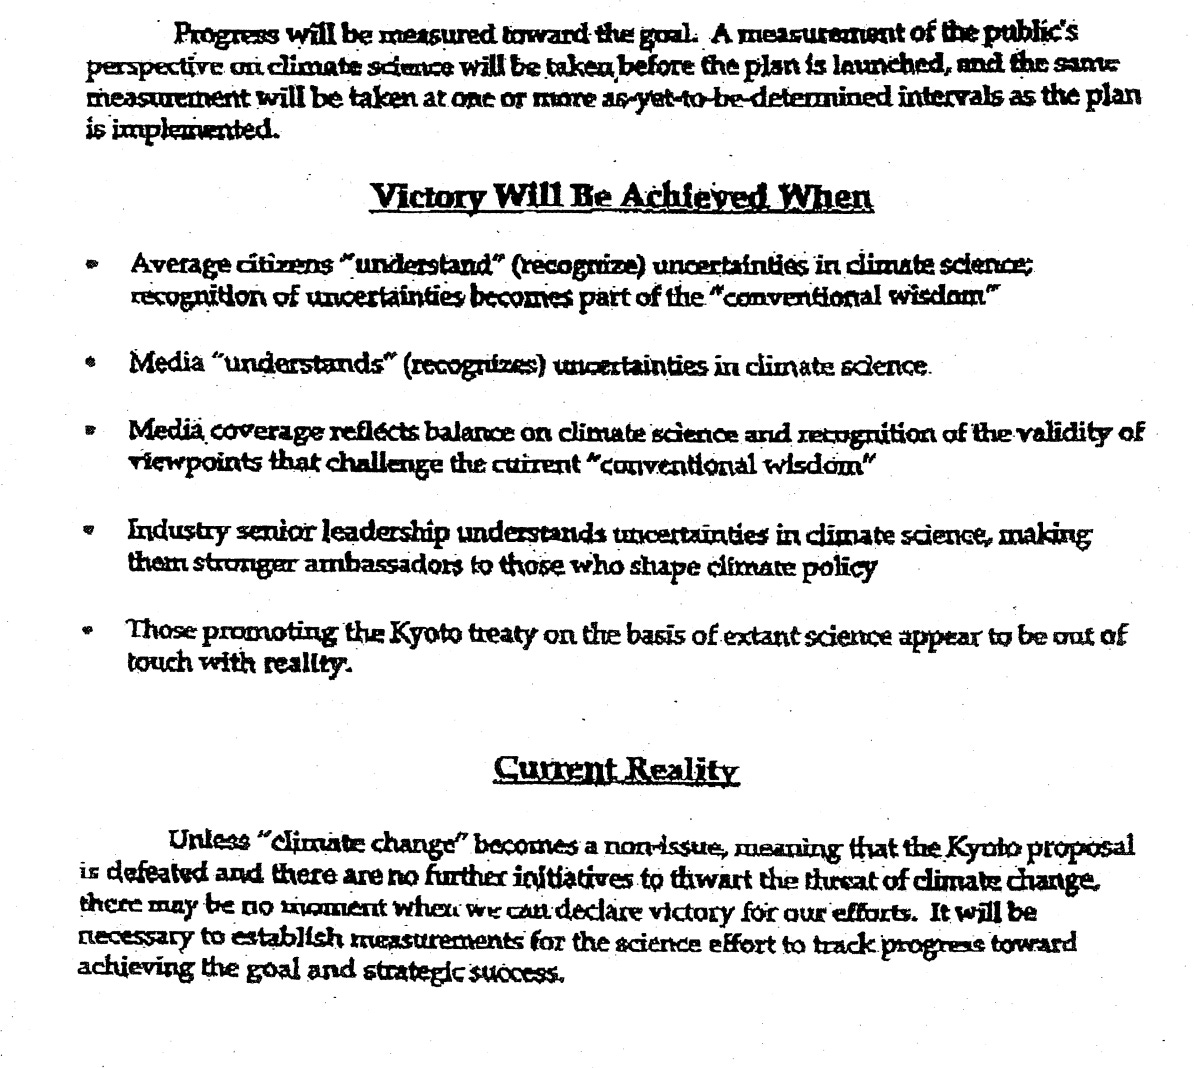 Screenshot of a scan of the API's campaign talking points and markers of success for its climate-related influence campaign, targeting citizens, media, business leaders and politicians, to convince them to "understand" that climate science is not settled.